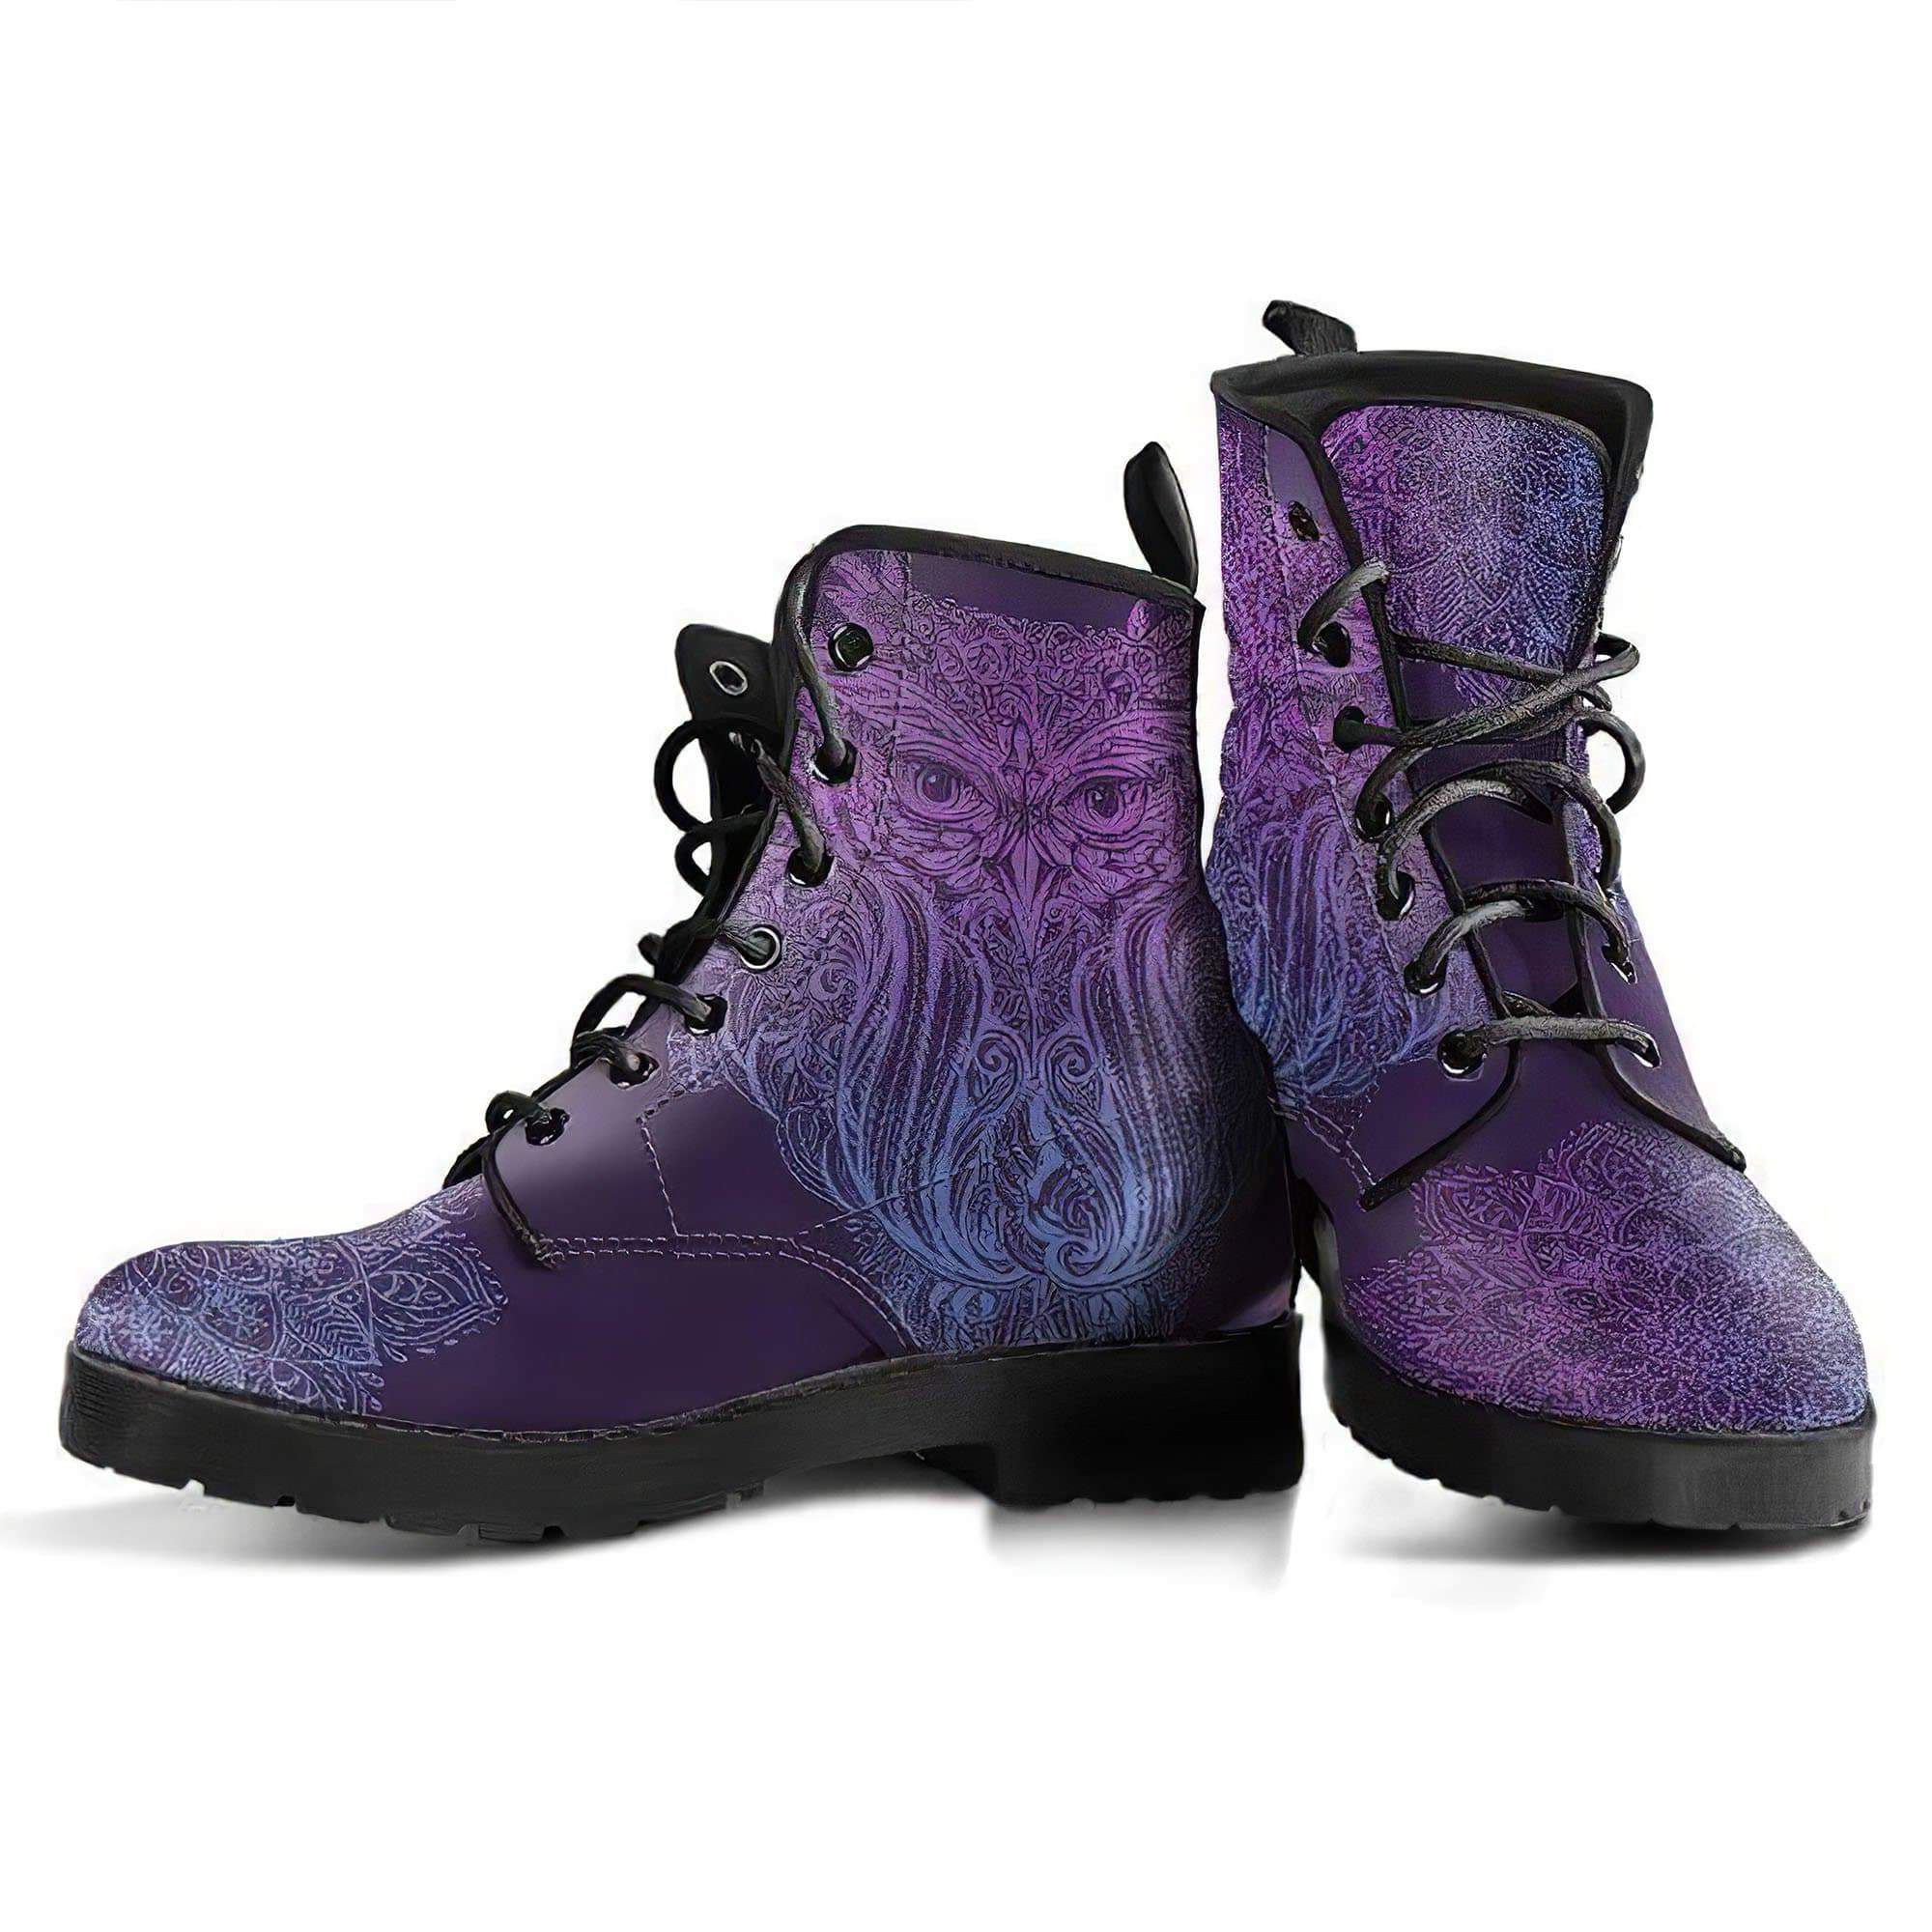 purple-owl-handcrafted-boots-women-s-leather-boots-12051937361981.jpg